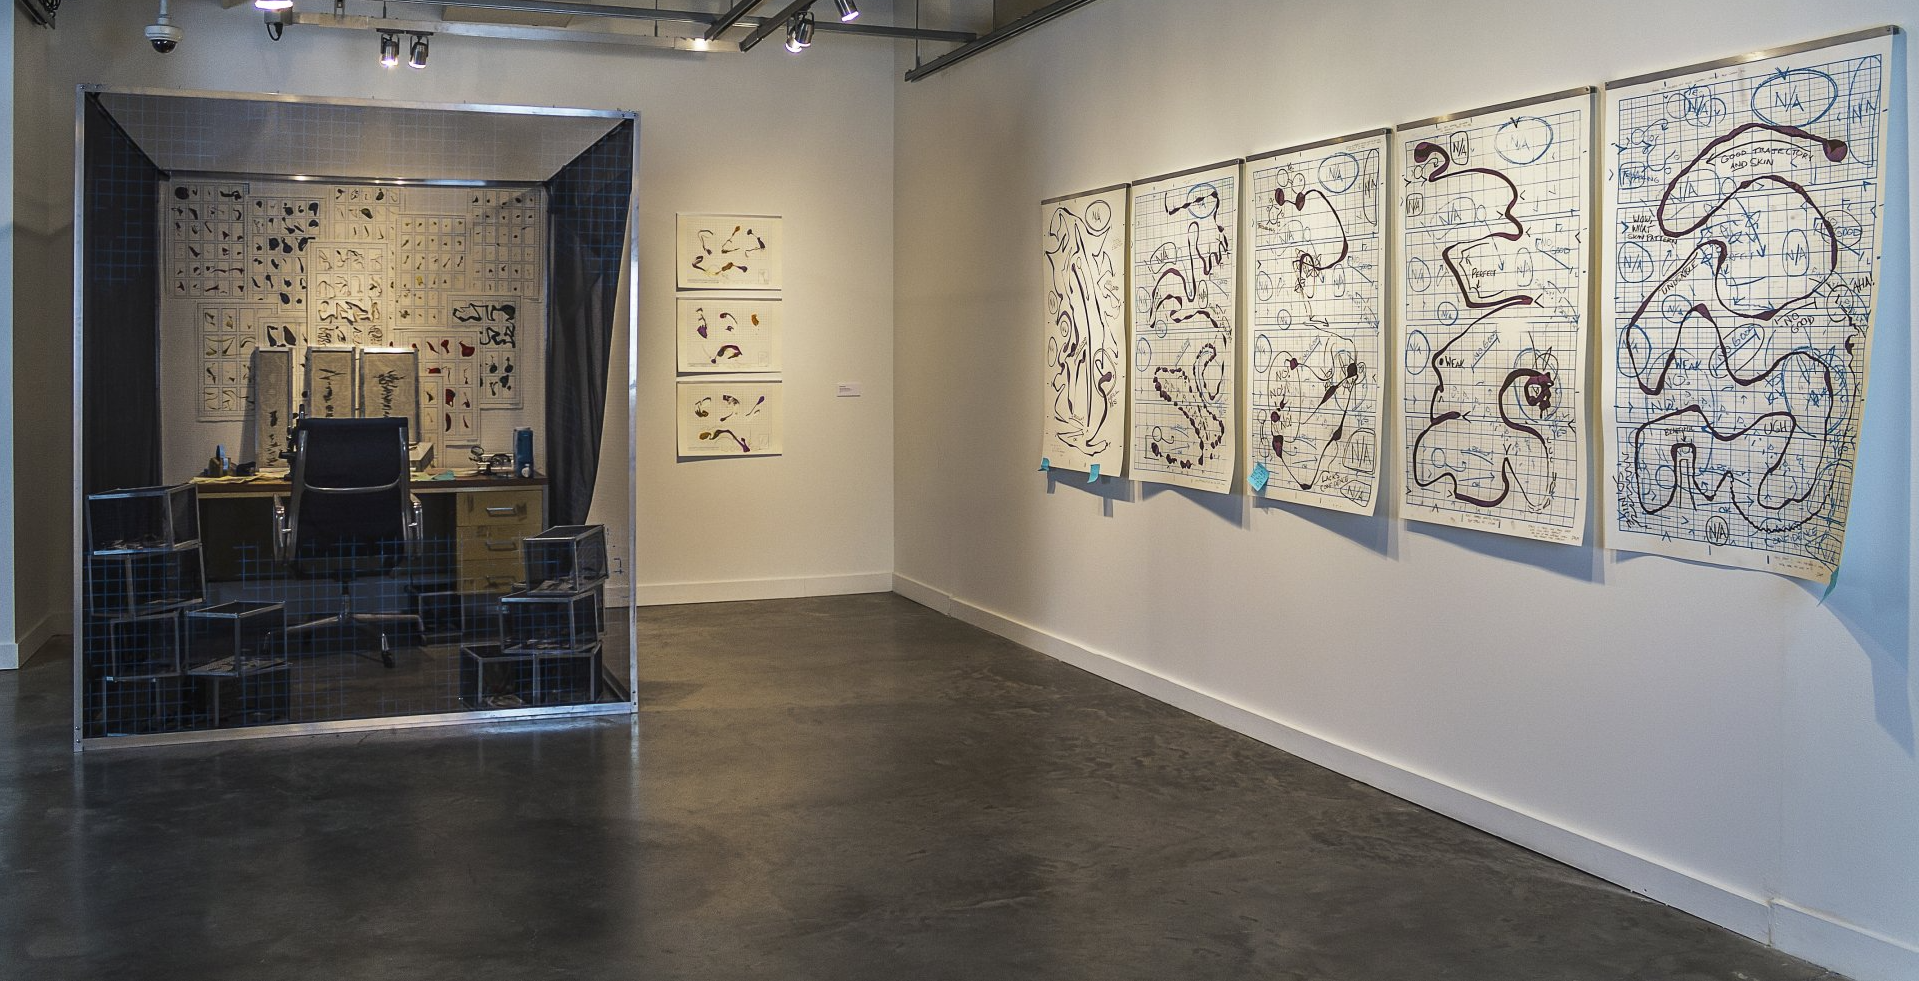 An image from a Dr. Armbruster installation, showing a vignette of Dr. Armbruster's office alongside multiple works on paper.